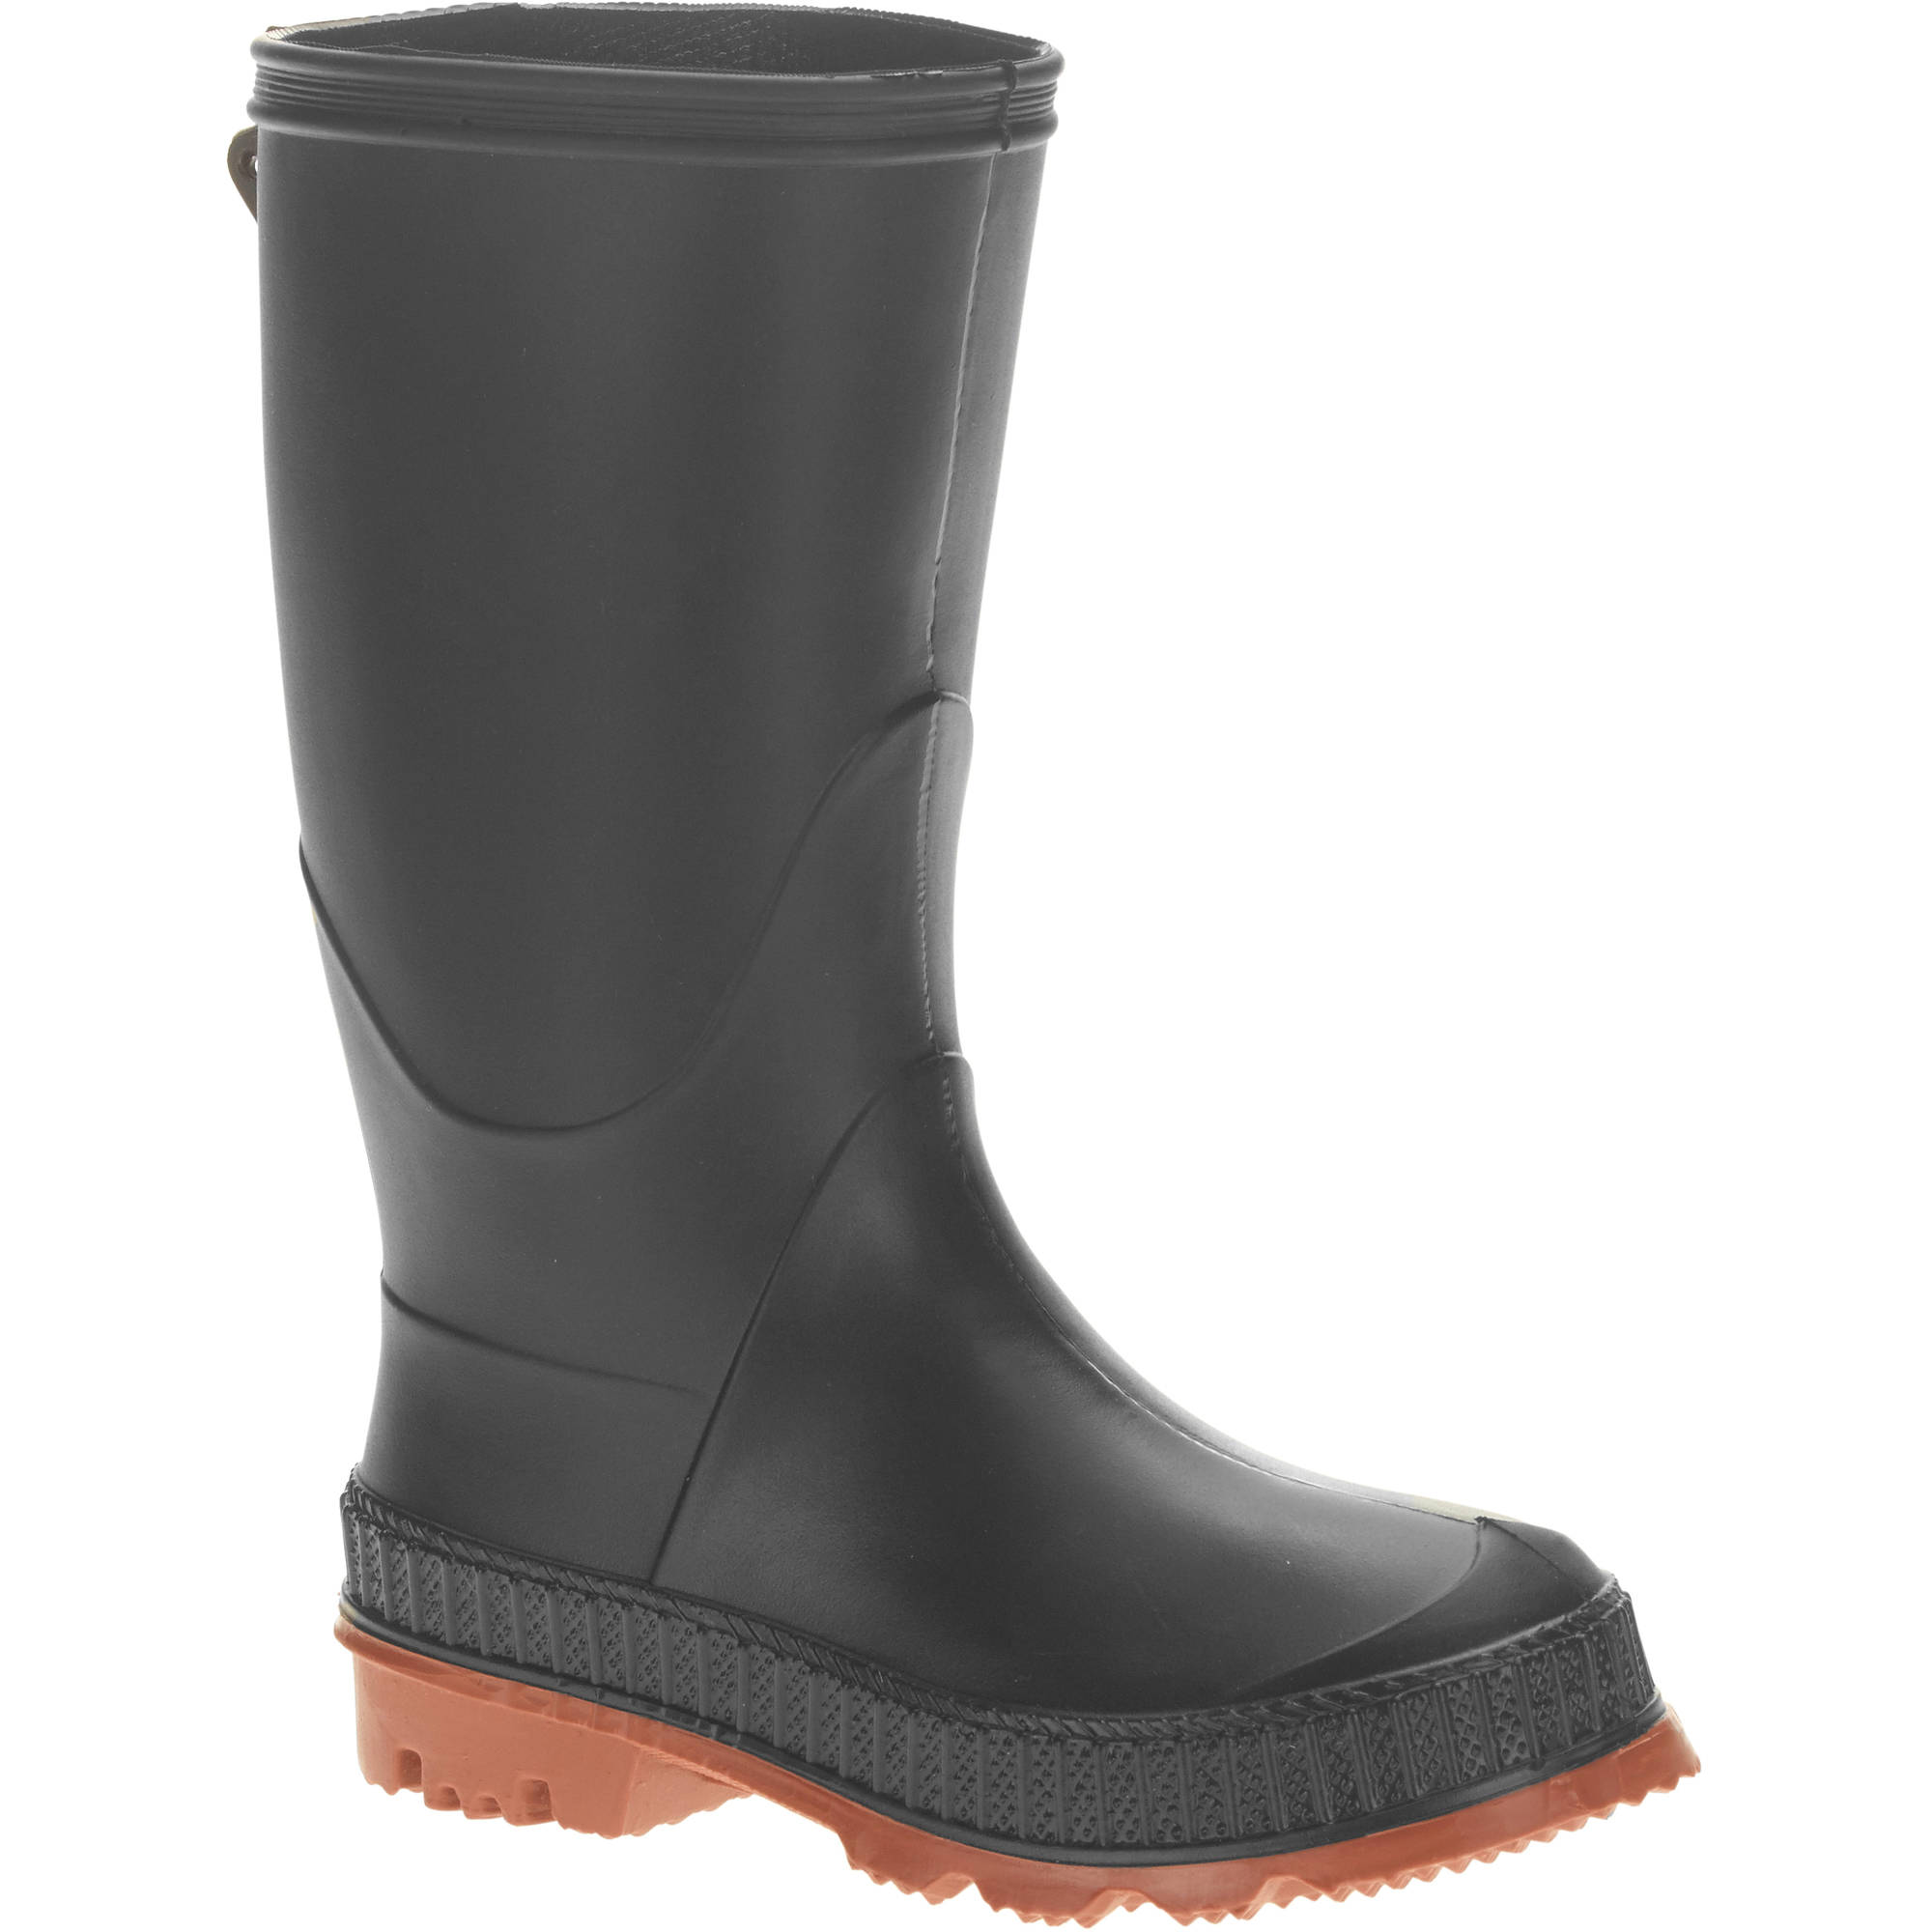 Toddler's Chain-Link Sole Chore Rain Boot - image 1 of 5